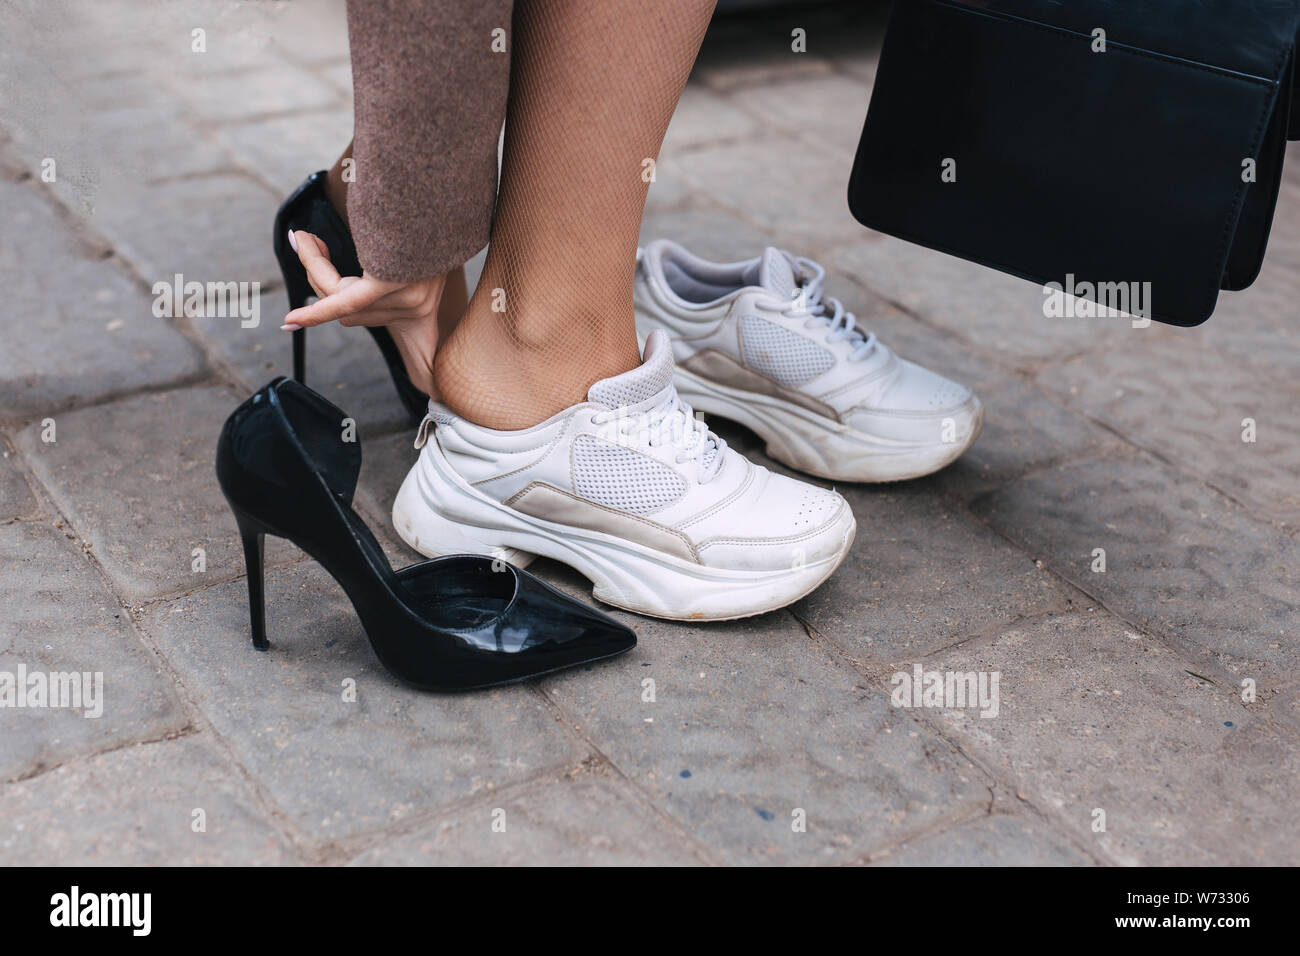 Barefoot business woman shanging shoes from high heel to comfortable sneaker Stock Photo